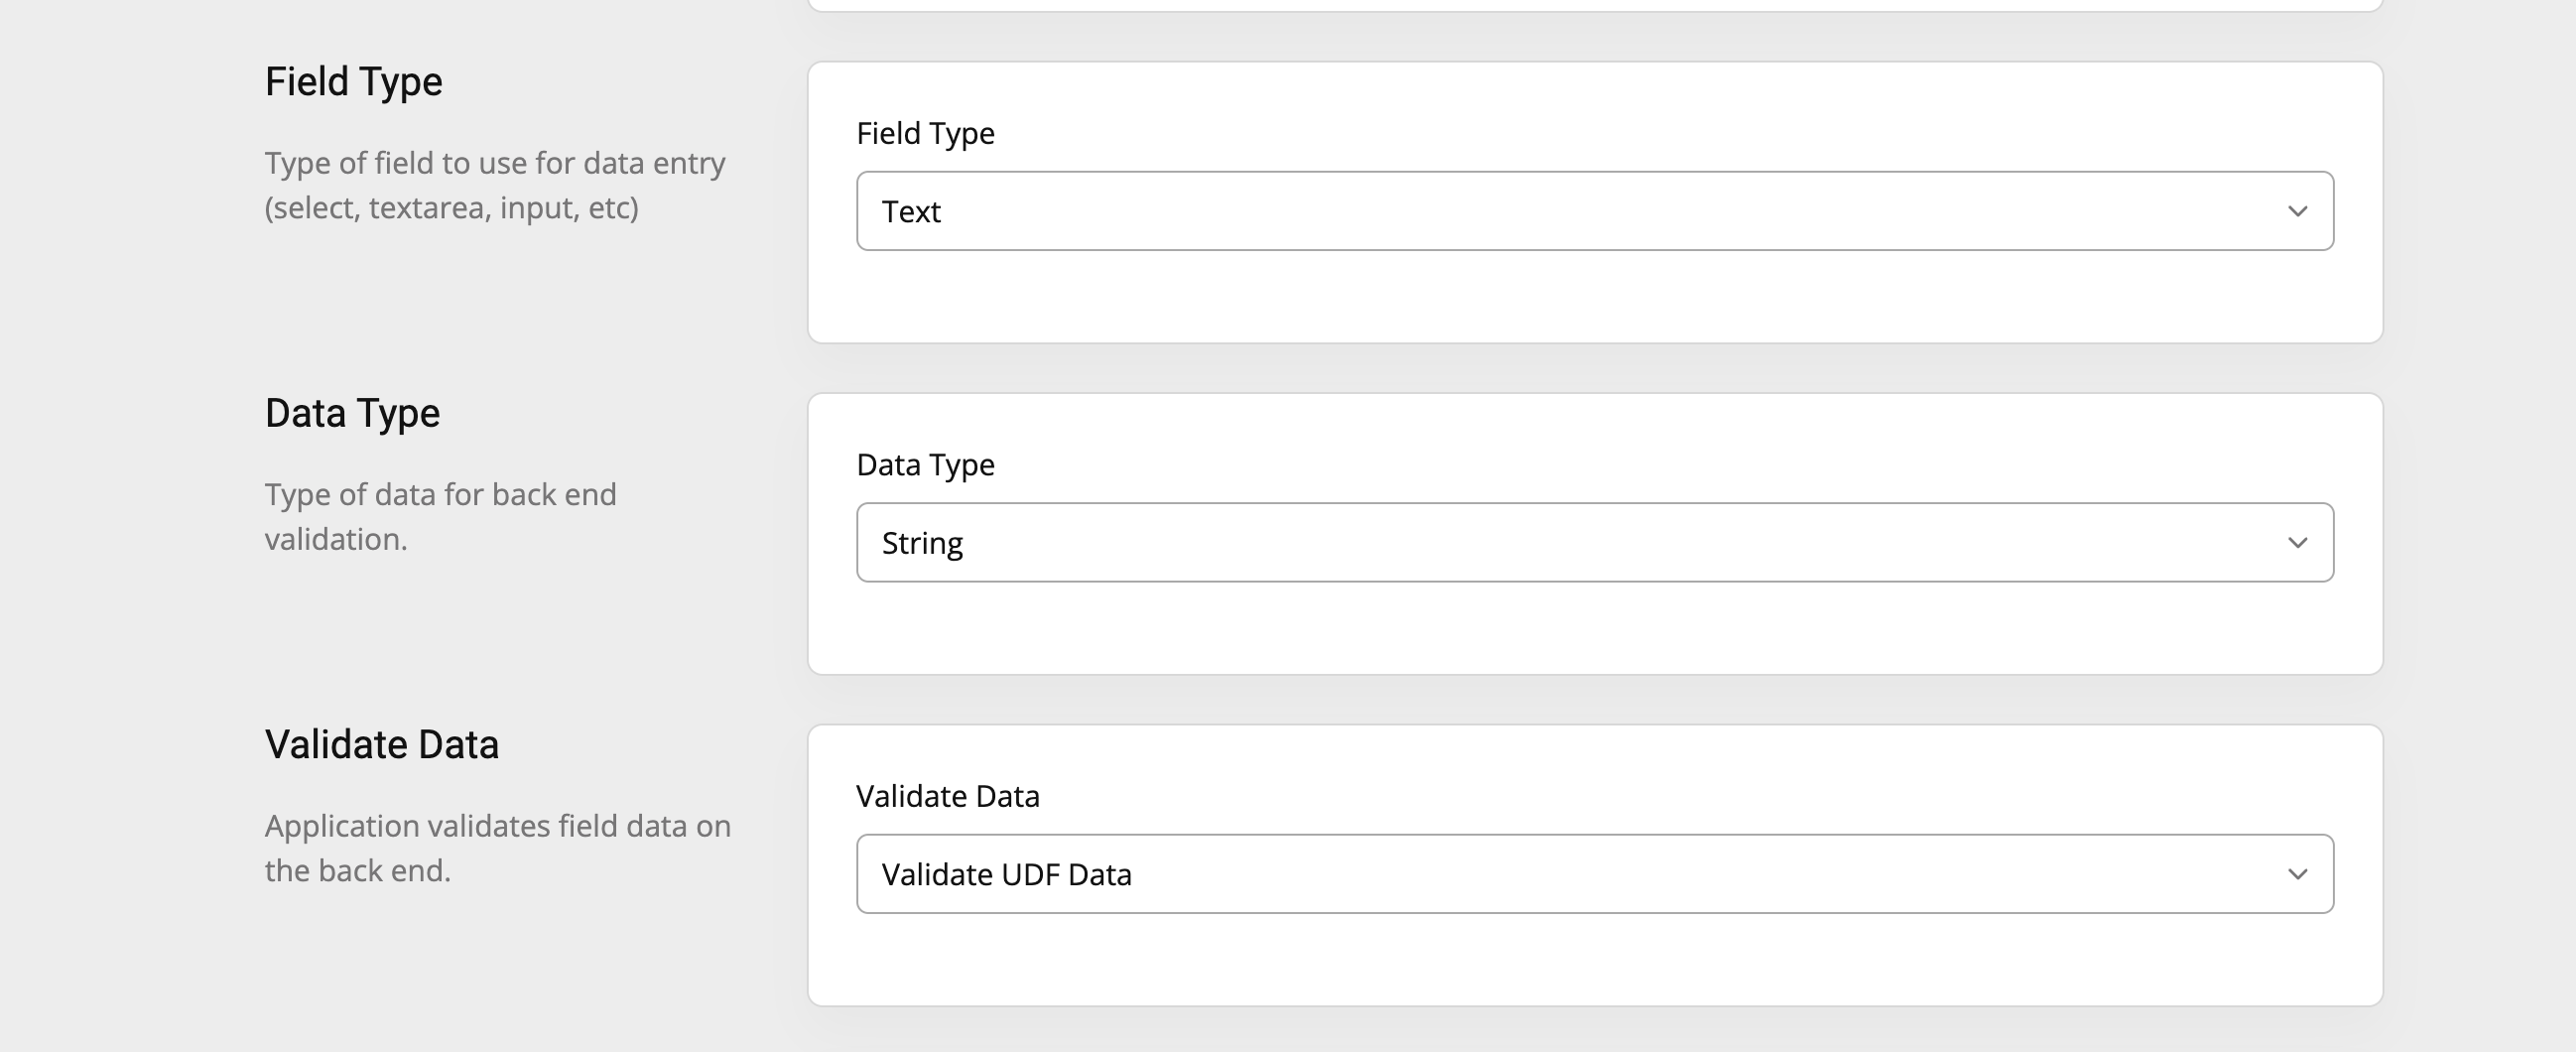 UDF Definition with Field Type, Data Type, Validate Data